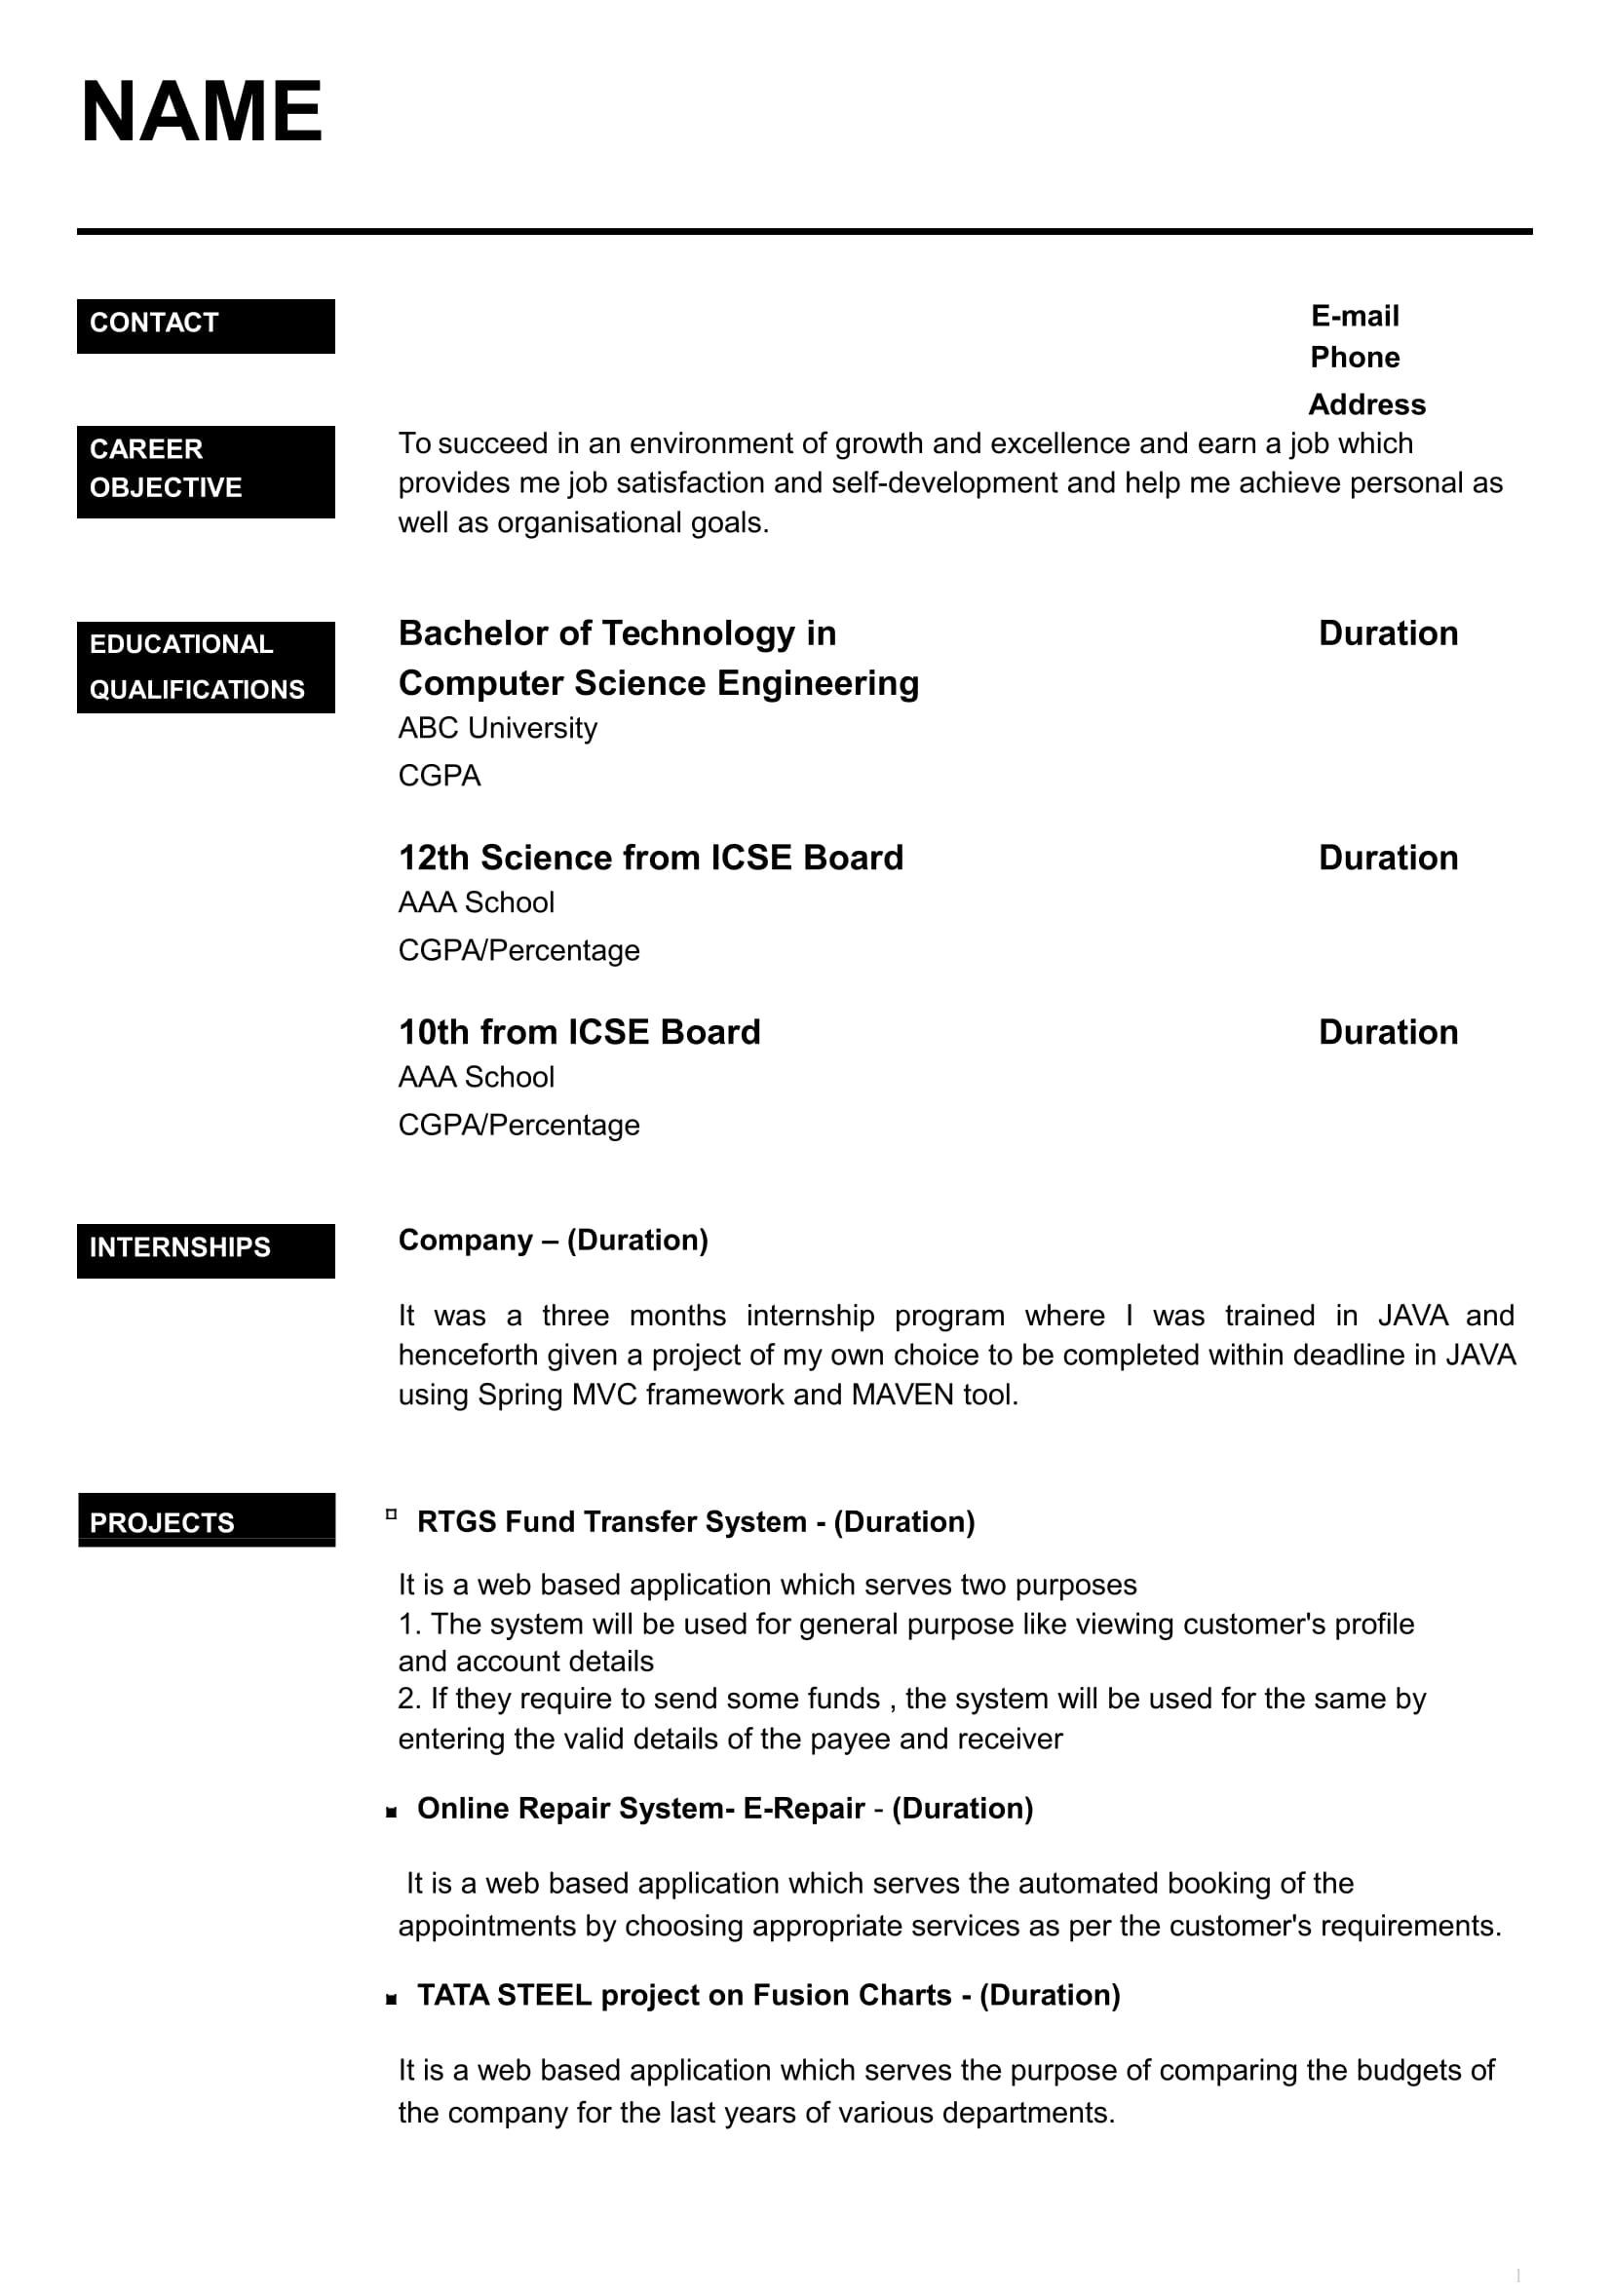 Sample Resume format for Freshers Free Download Cv for Freshers In Word – ‘google à¤¸à¤°à¥à¤’ Best Resume format …